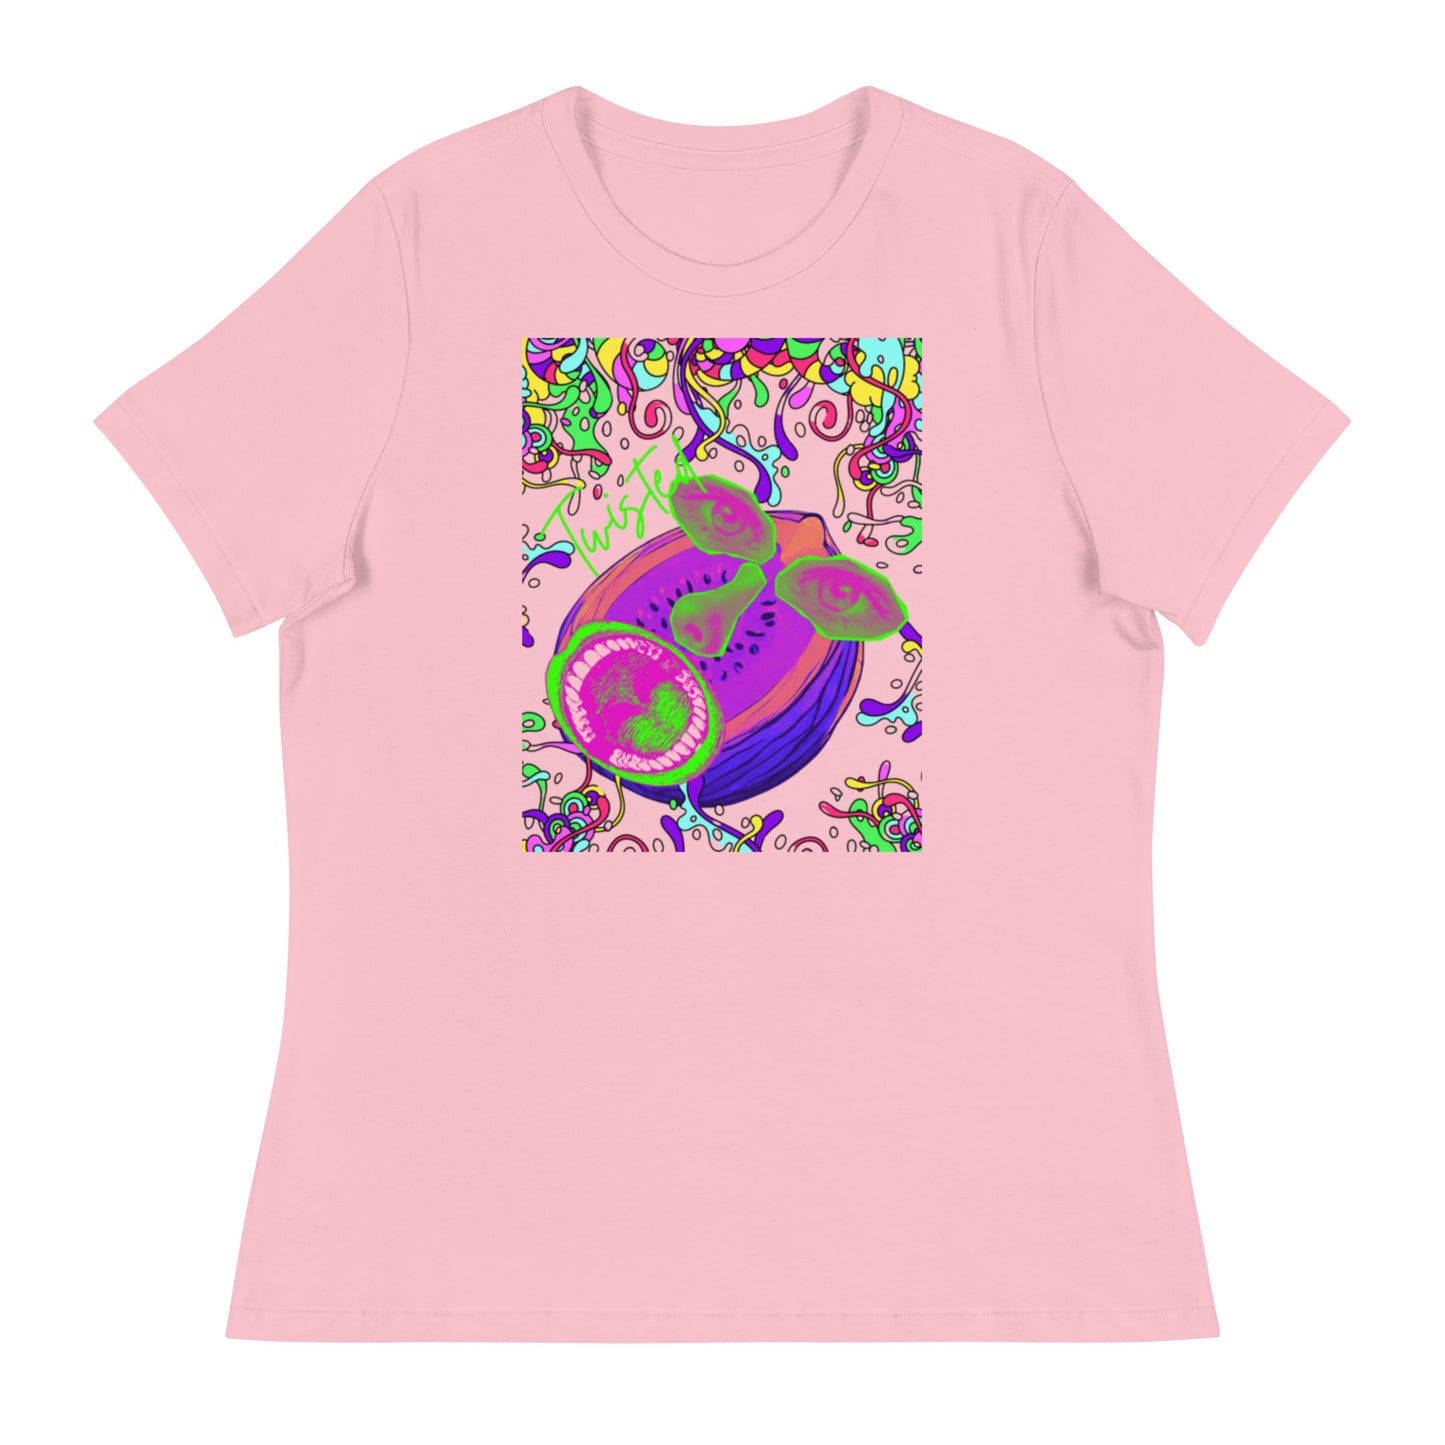 A Twisted Melon Women's Tee